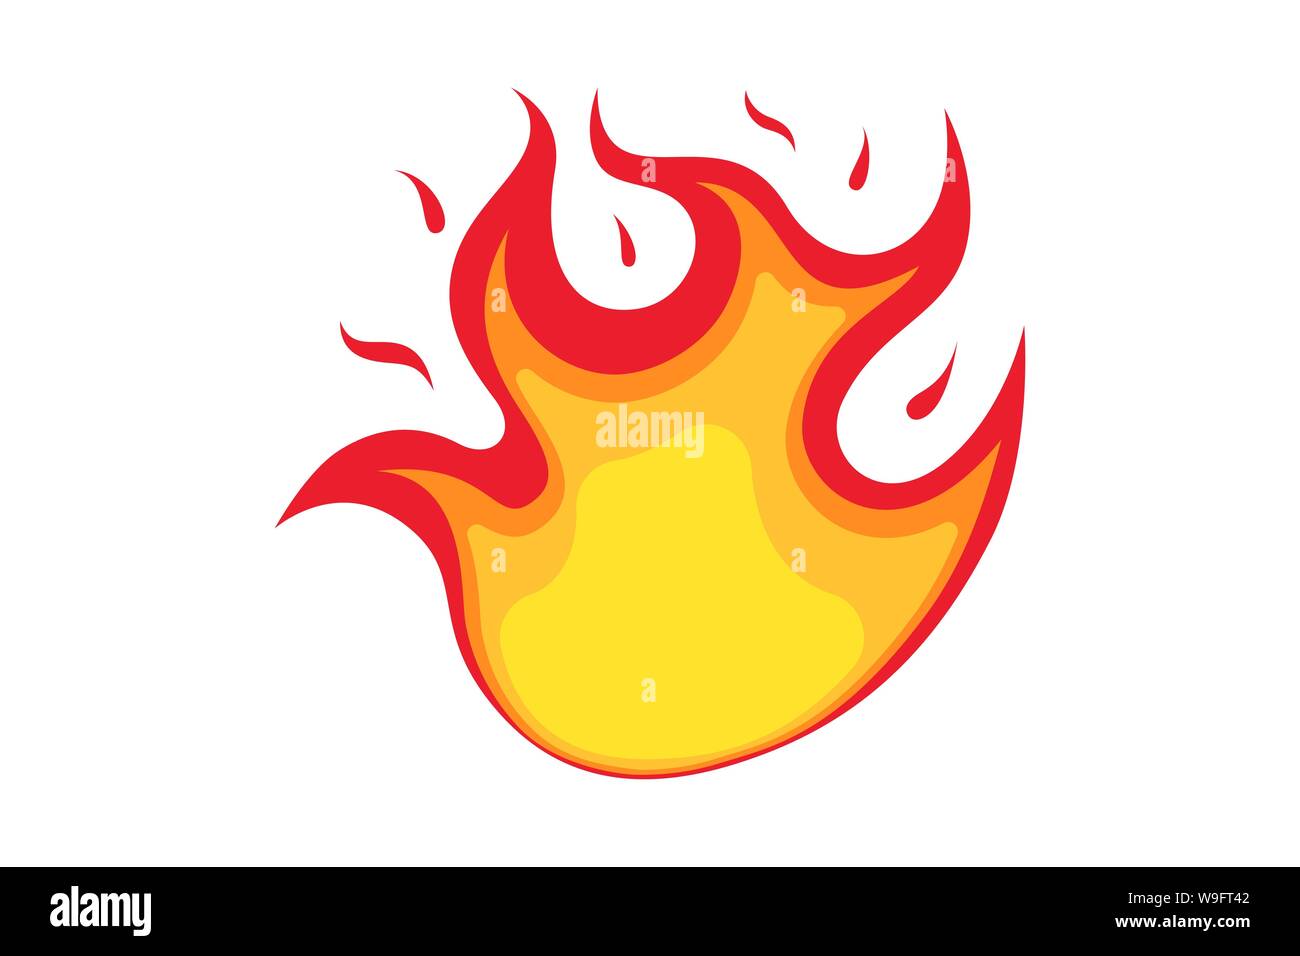 Fire flame emoji icon. Isolated bonfire sign emoticon symbol on white background. Vector burn illustration Stock Vector